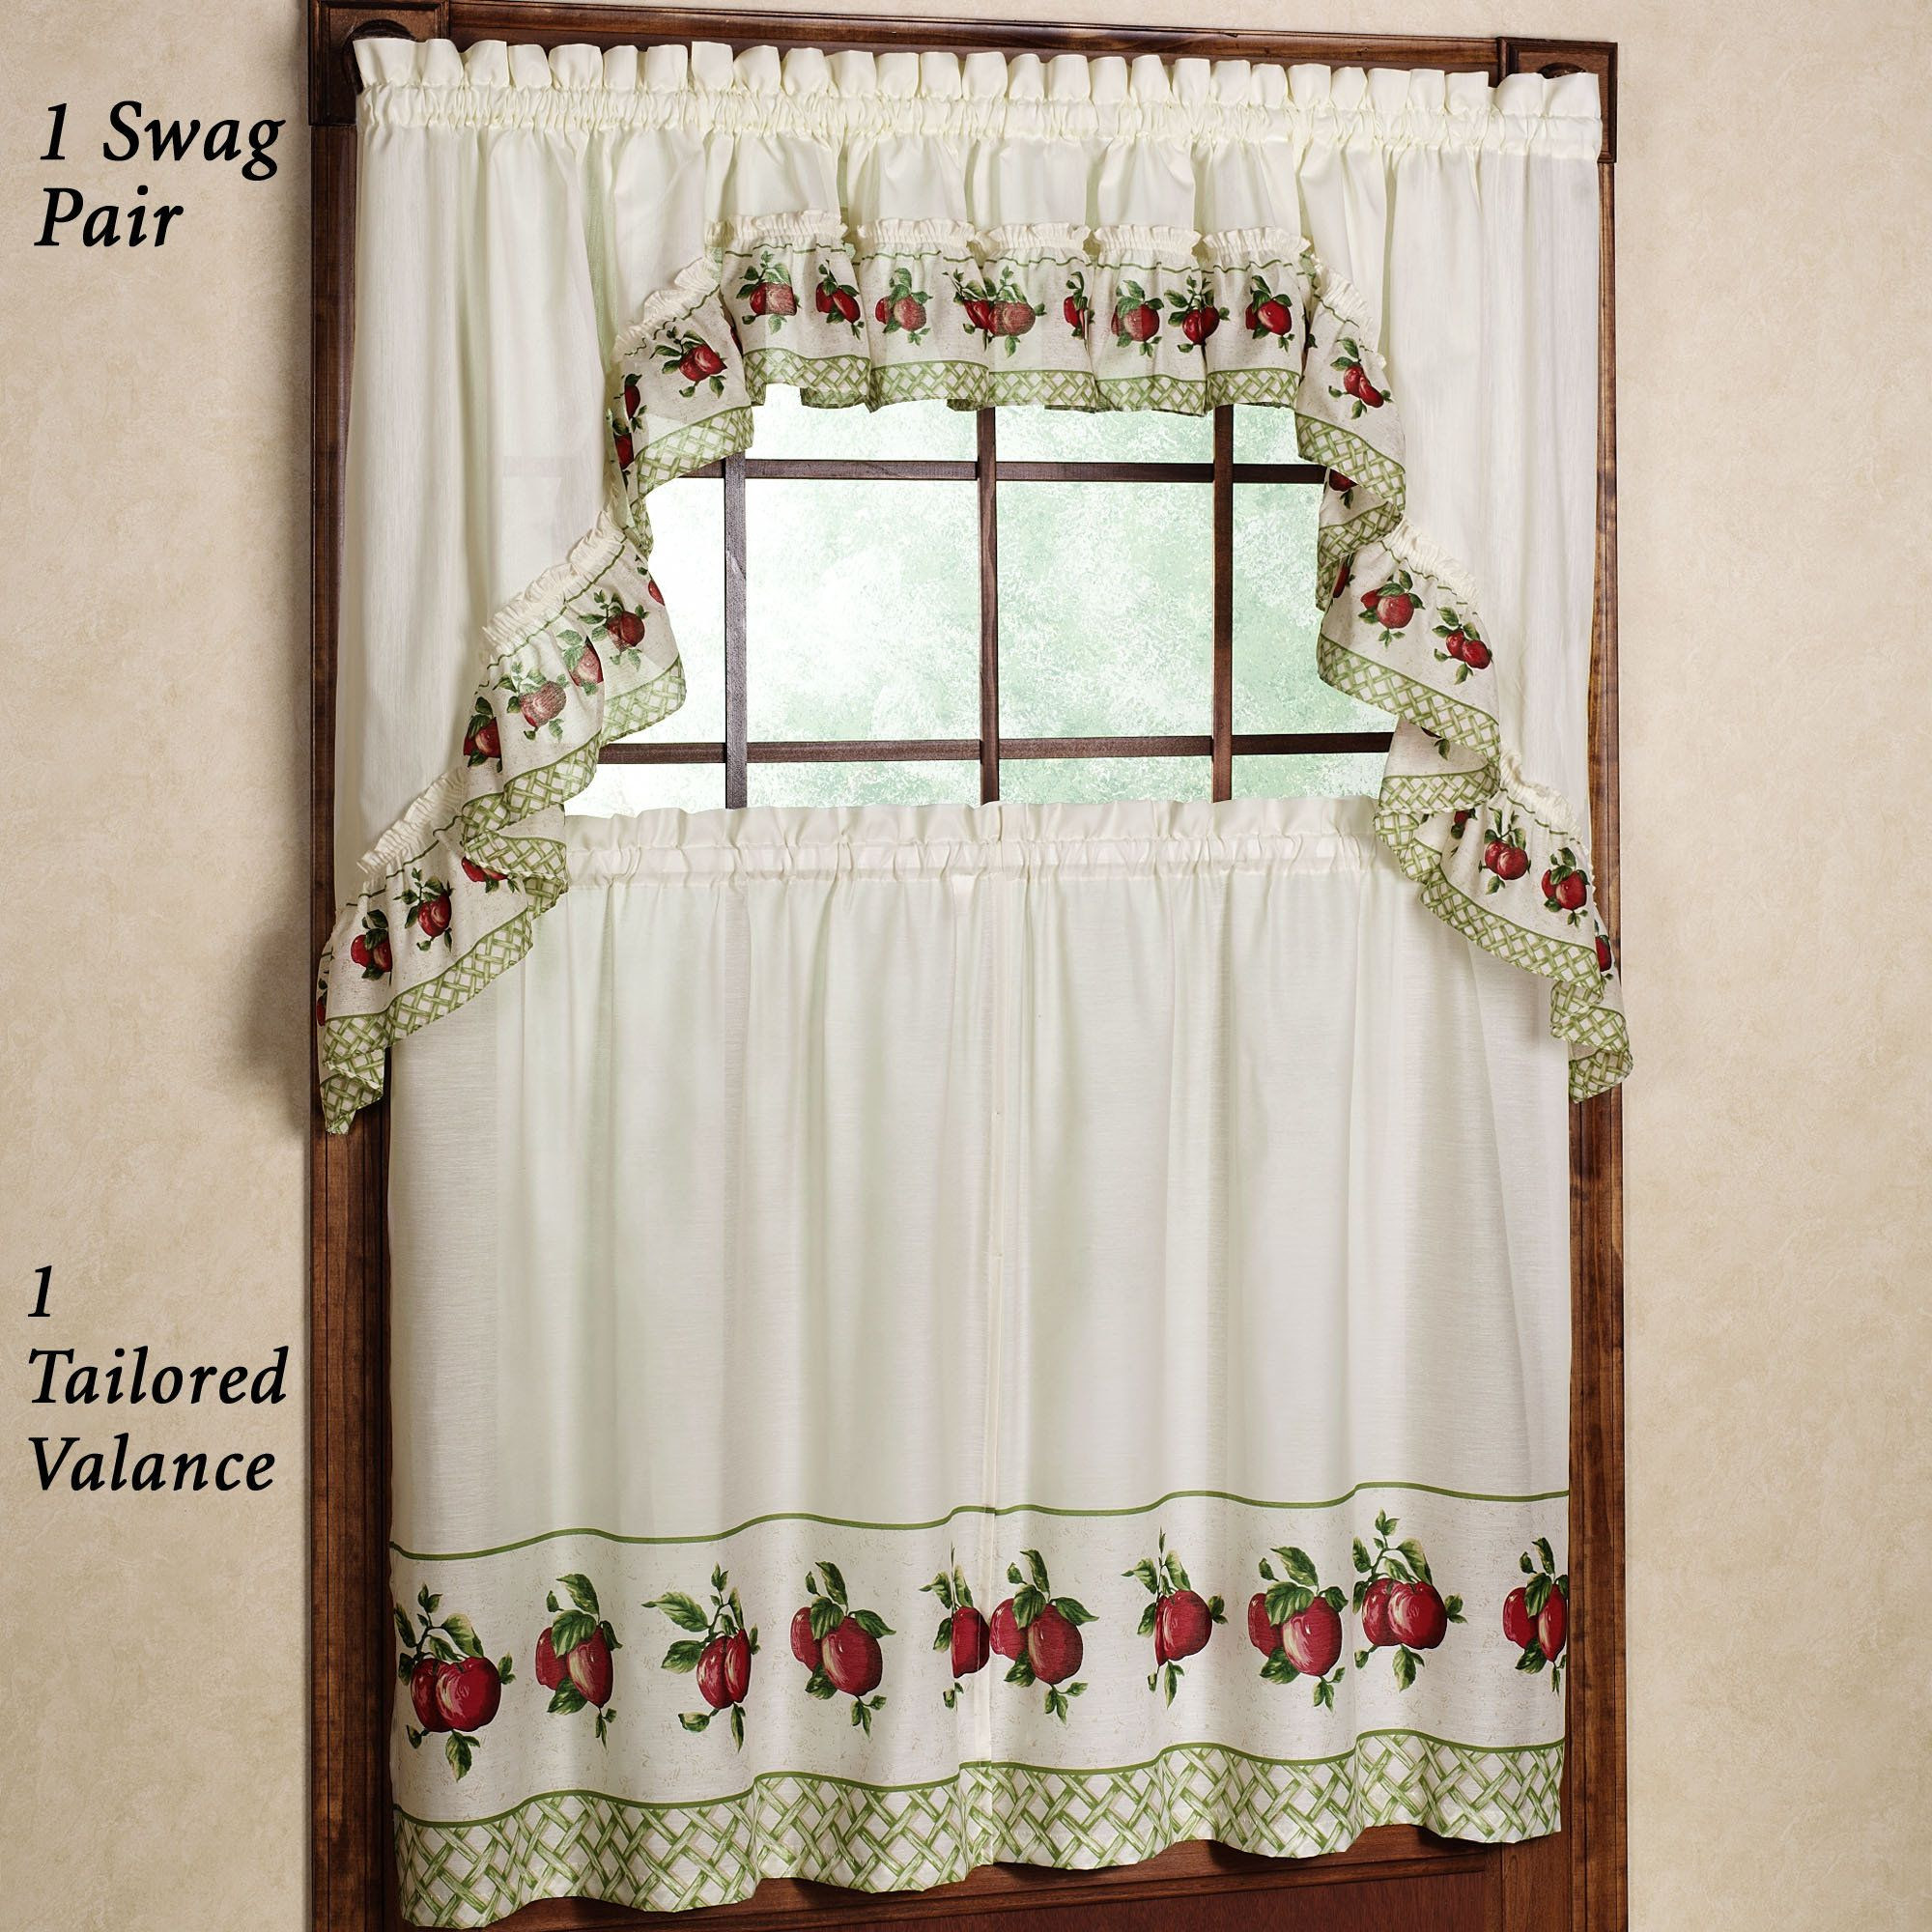 Jc Penneys Kitchen Curtains
 Curtain Elegant Interior Home Decorating Ideas With